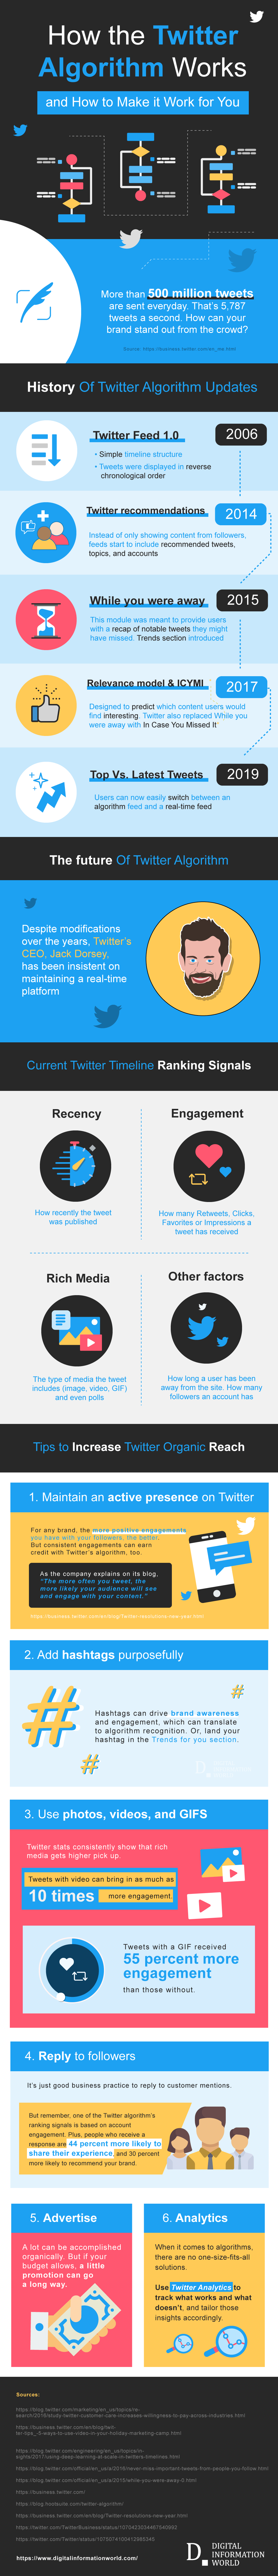 , Understanding Twitter&#8217;s Timeline Algorithm to Make Your Brand Stand Out in 2019 [infographic], TornCRM